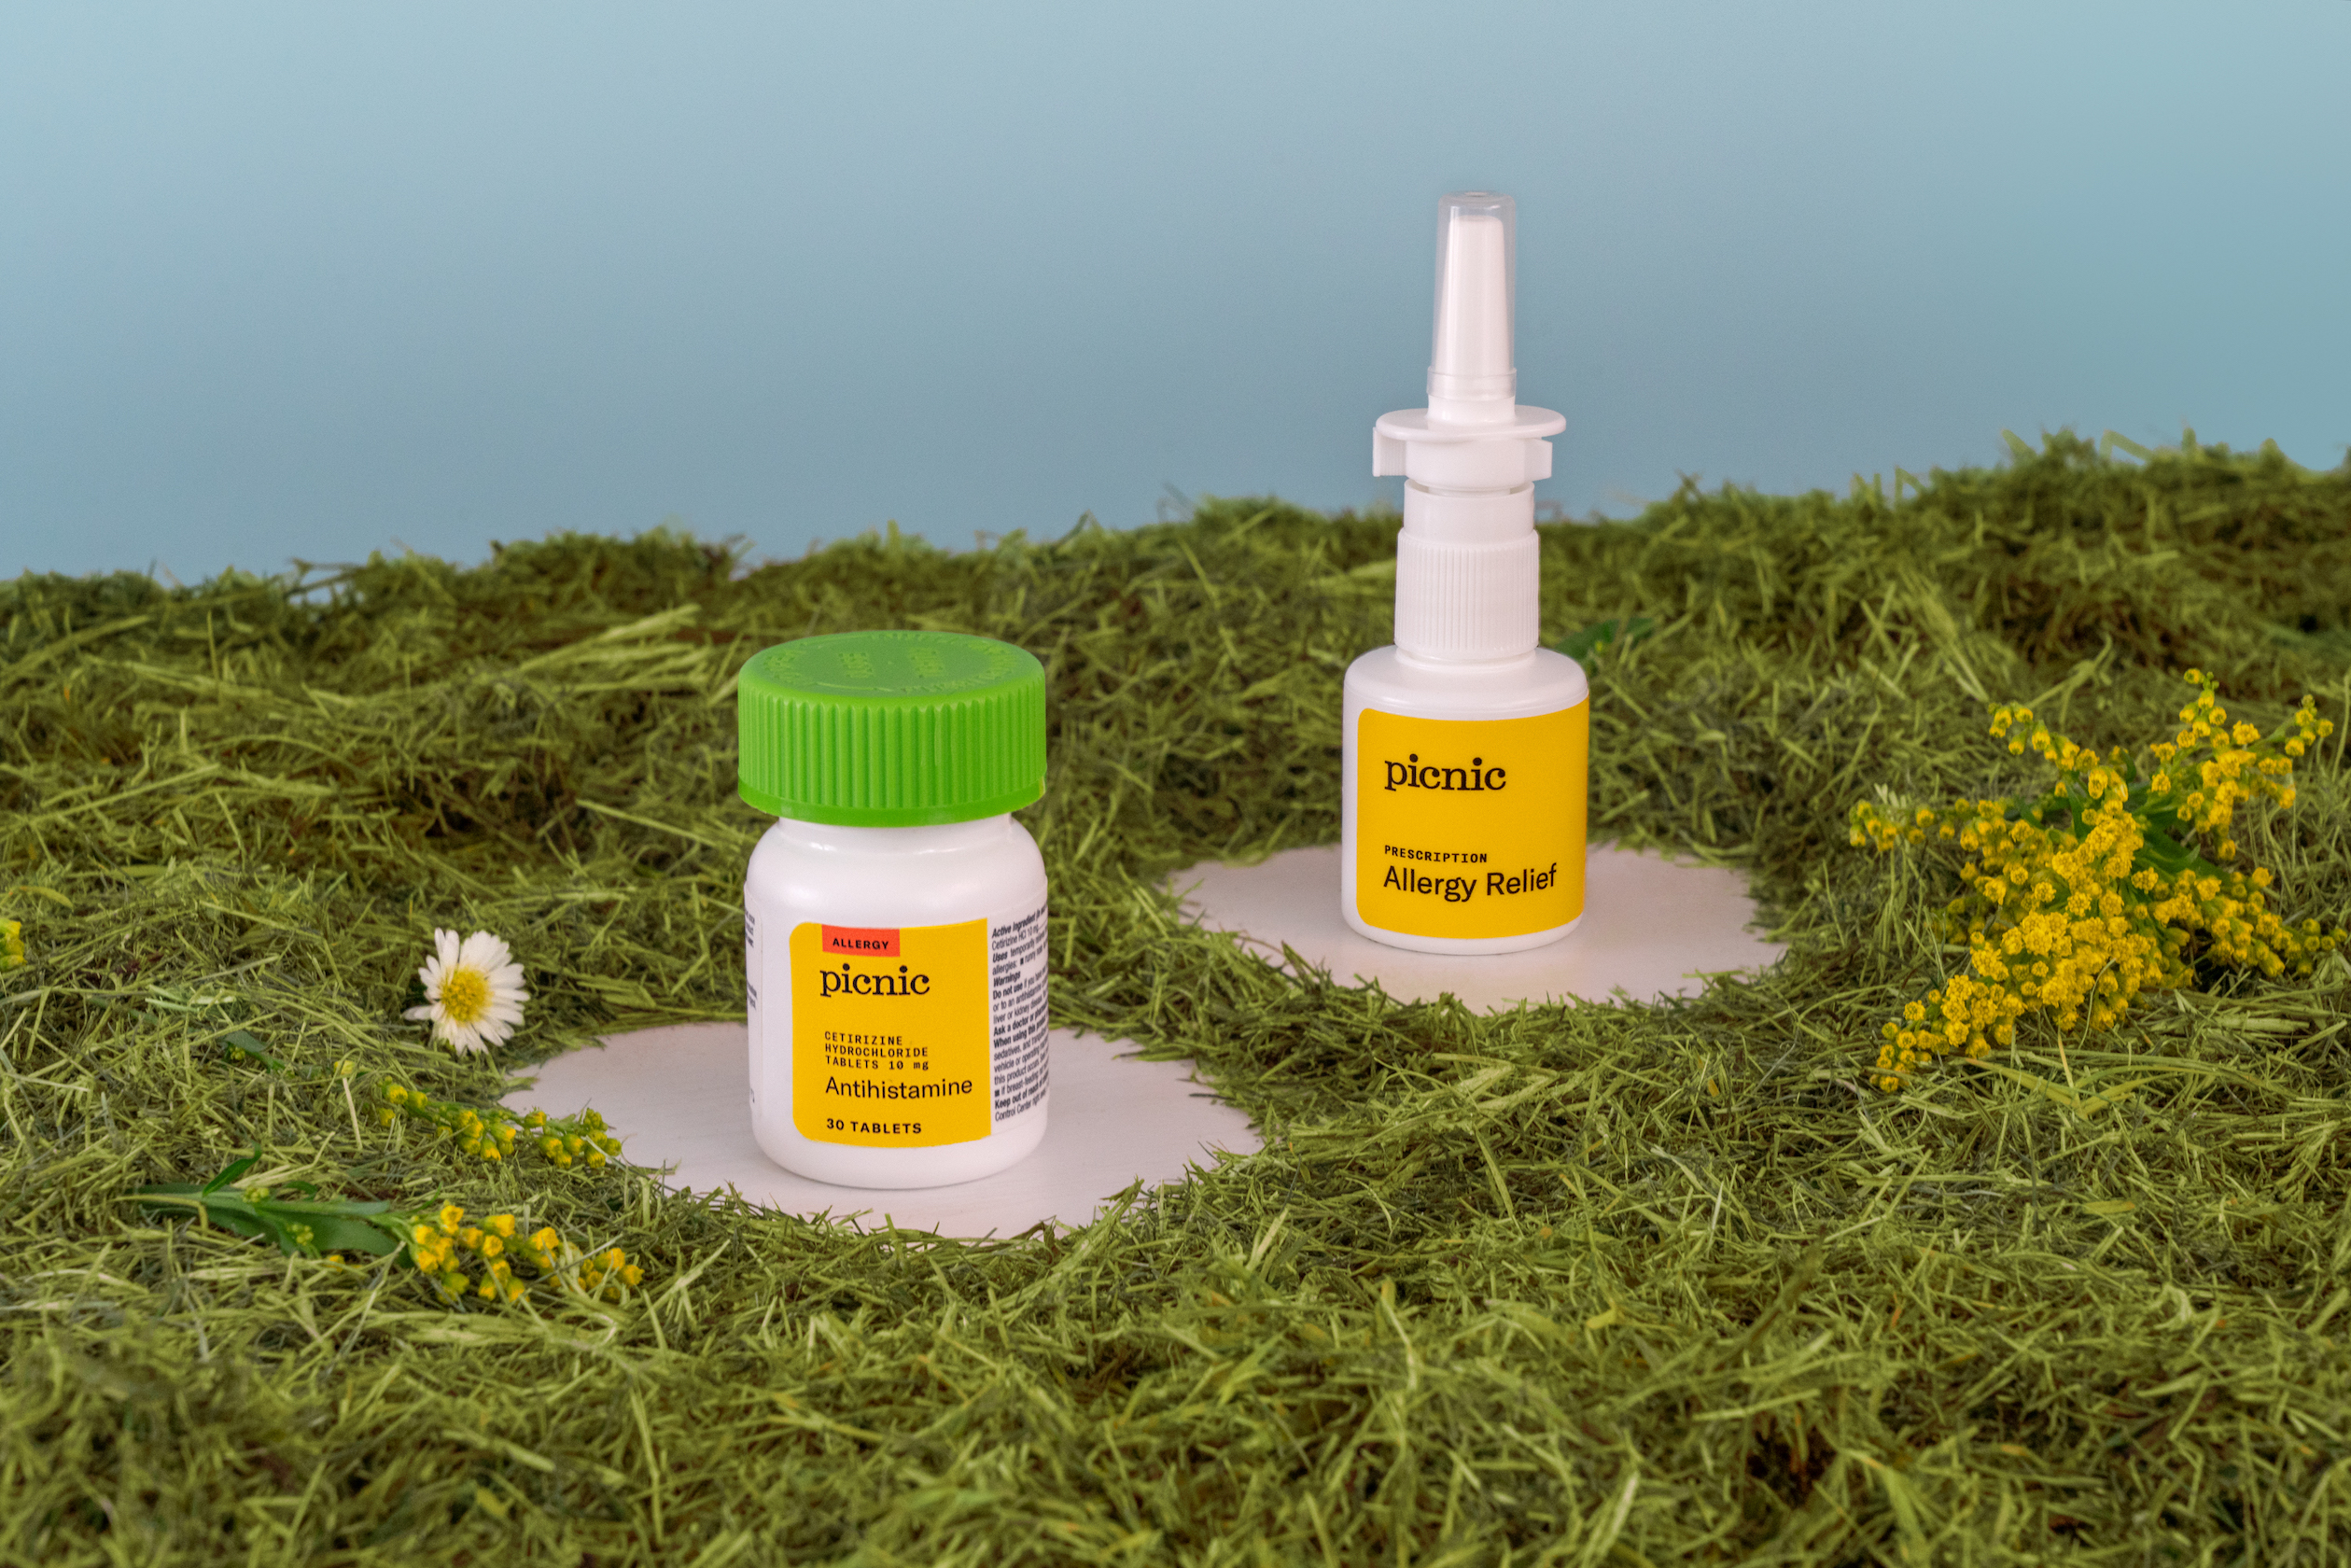 Photo of two bottles of Picnic allergy treatment surrounded by grass and flowers.